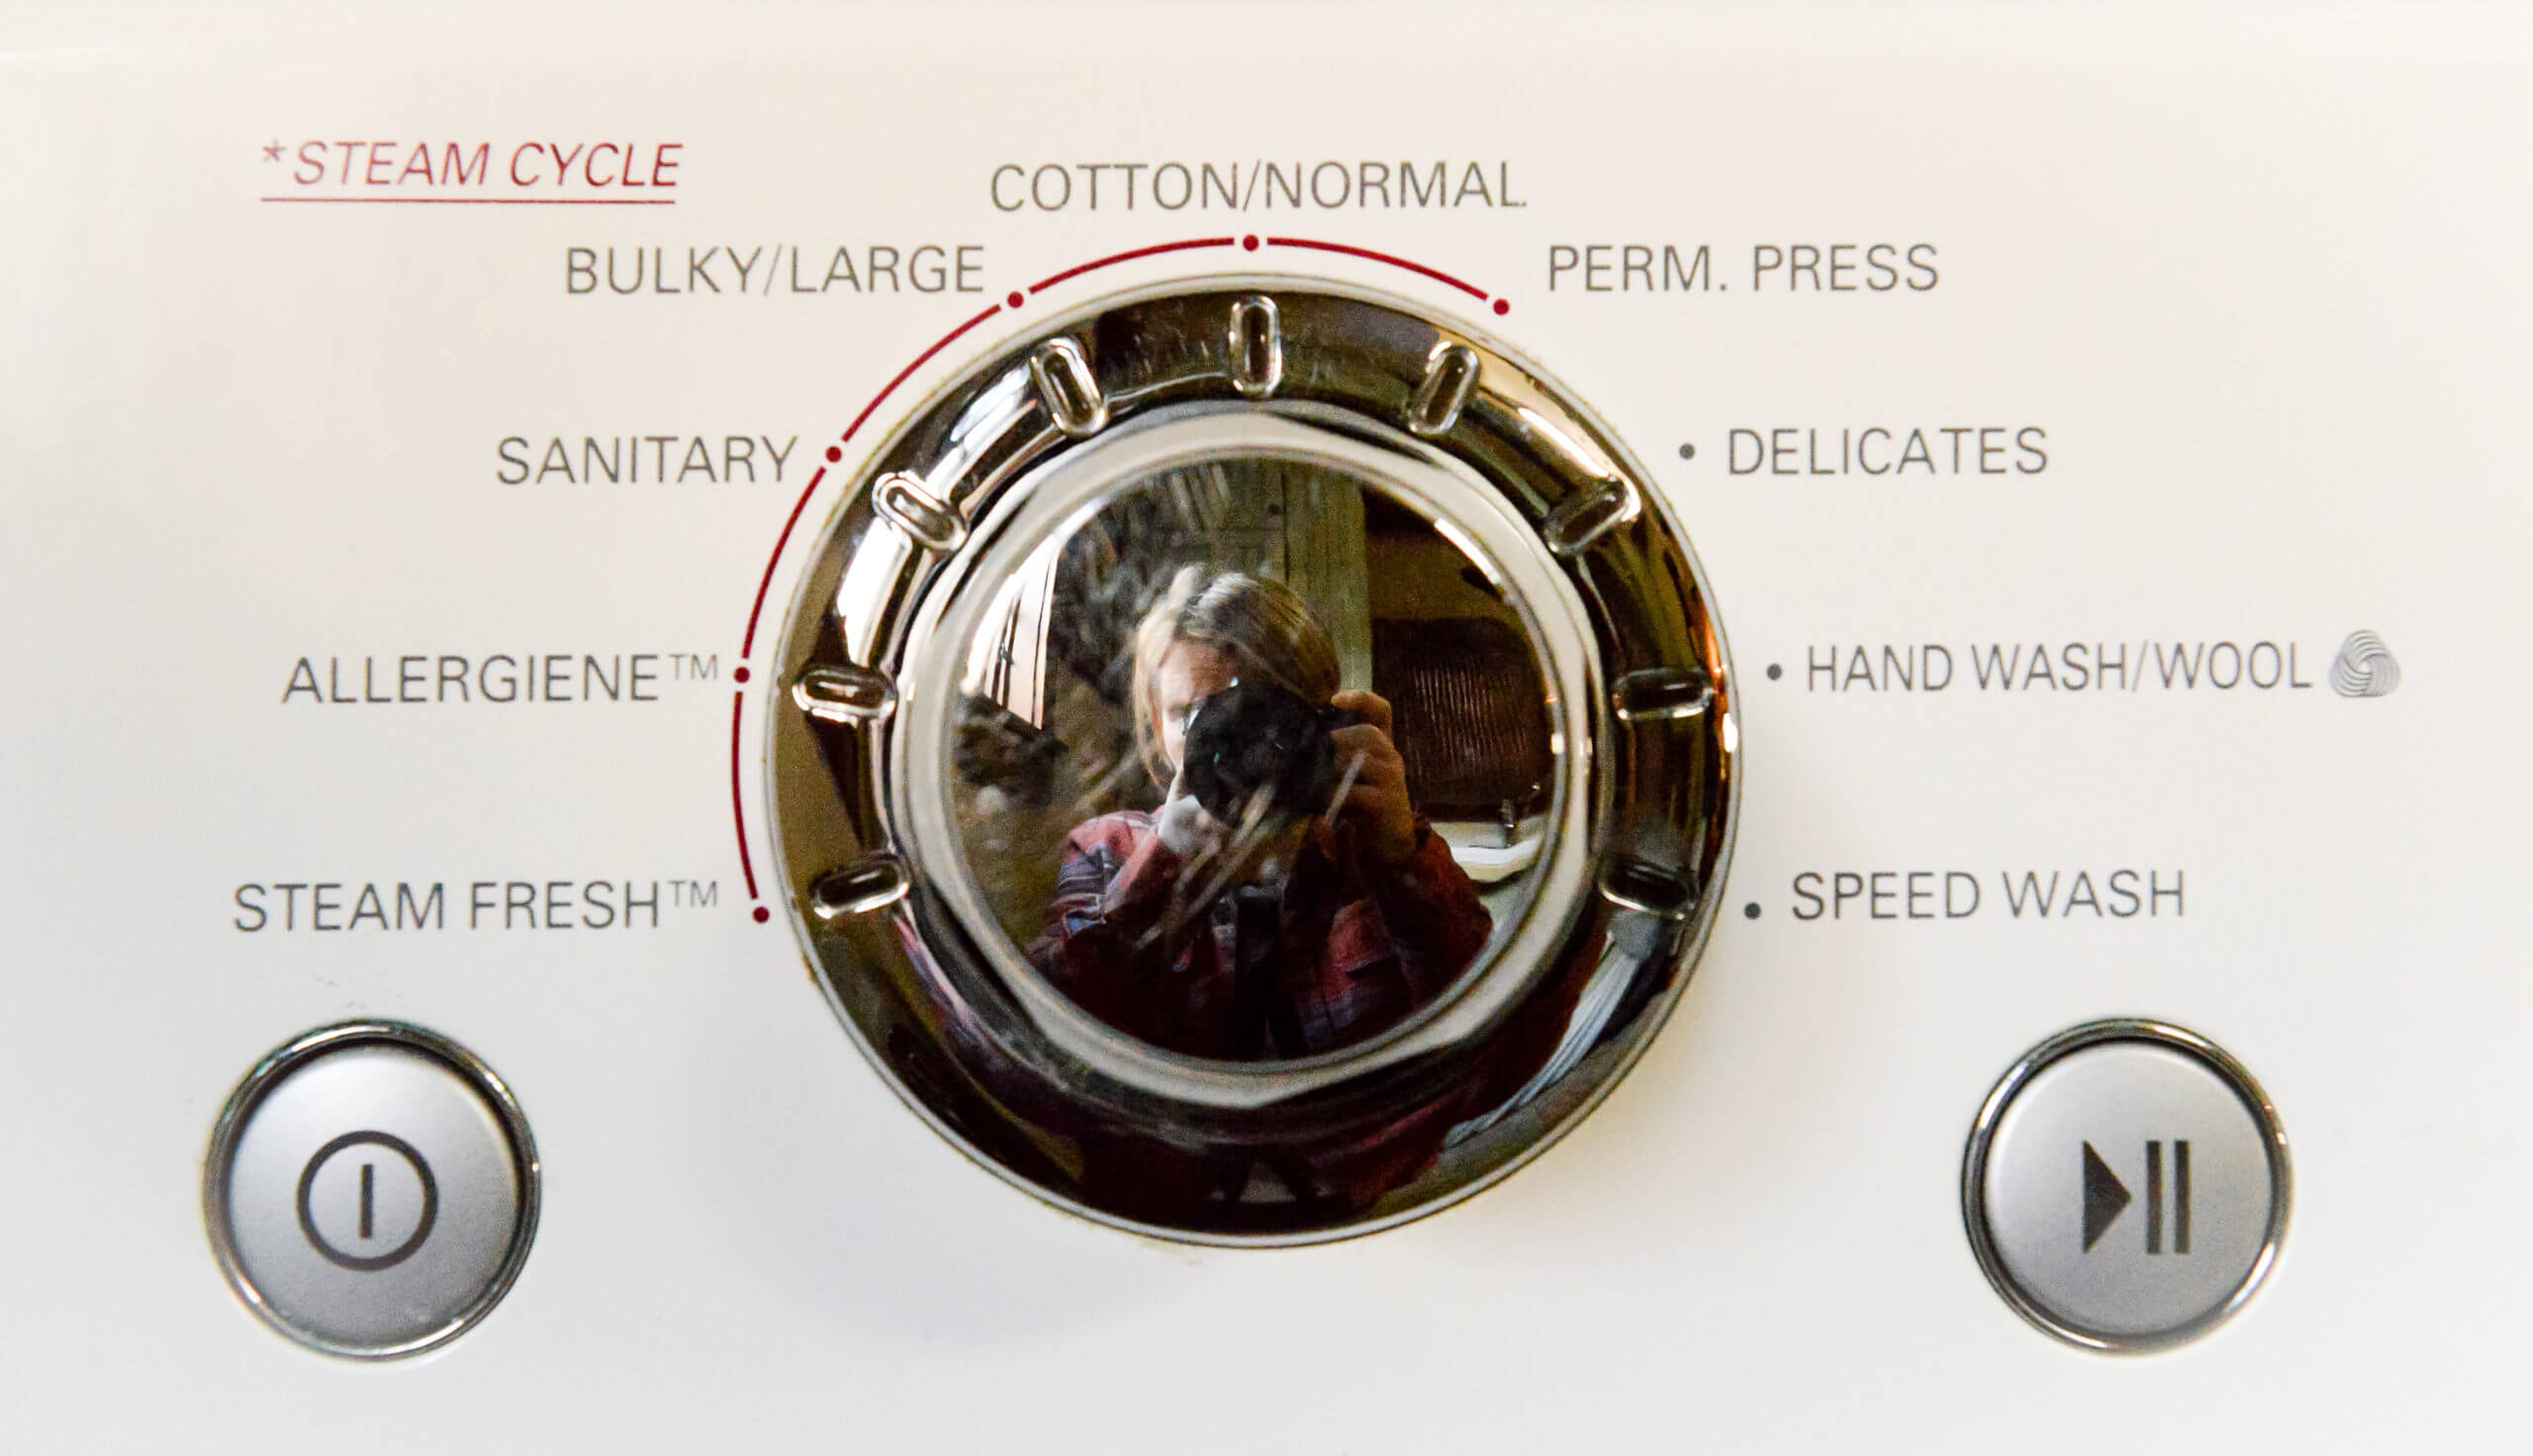 The settings dial of a washing machine. The dial is chrome and the photographer's reflection is shown at the center of the dial.